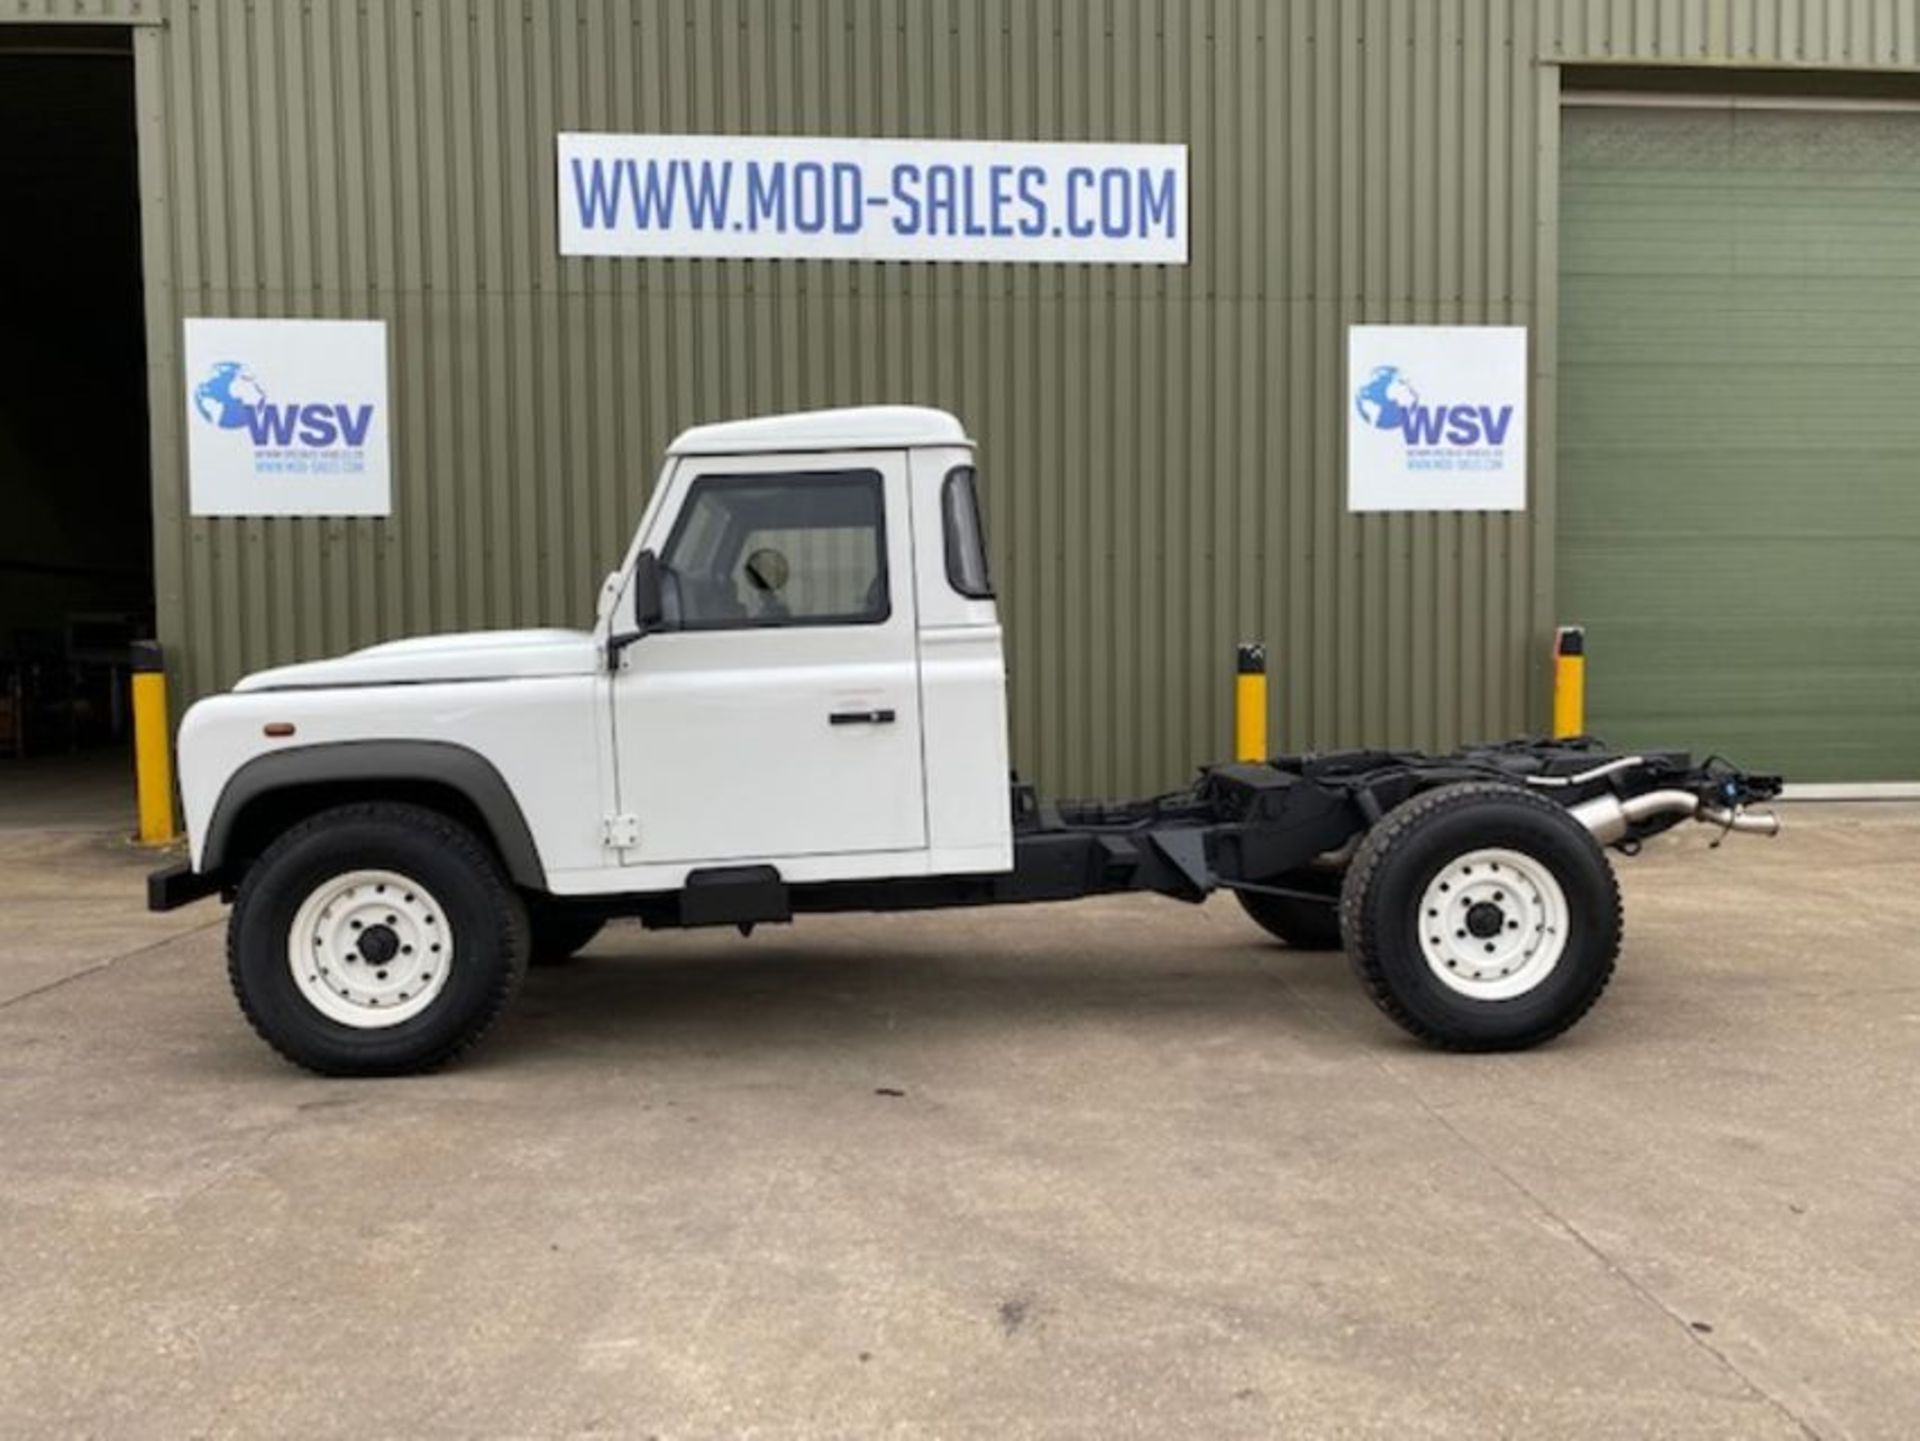 Land Rover Defender 130 chassis cab, Armoured bodywork, 2 door station wagon, right hand drive (RHD) - Image 6 of 51